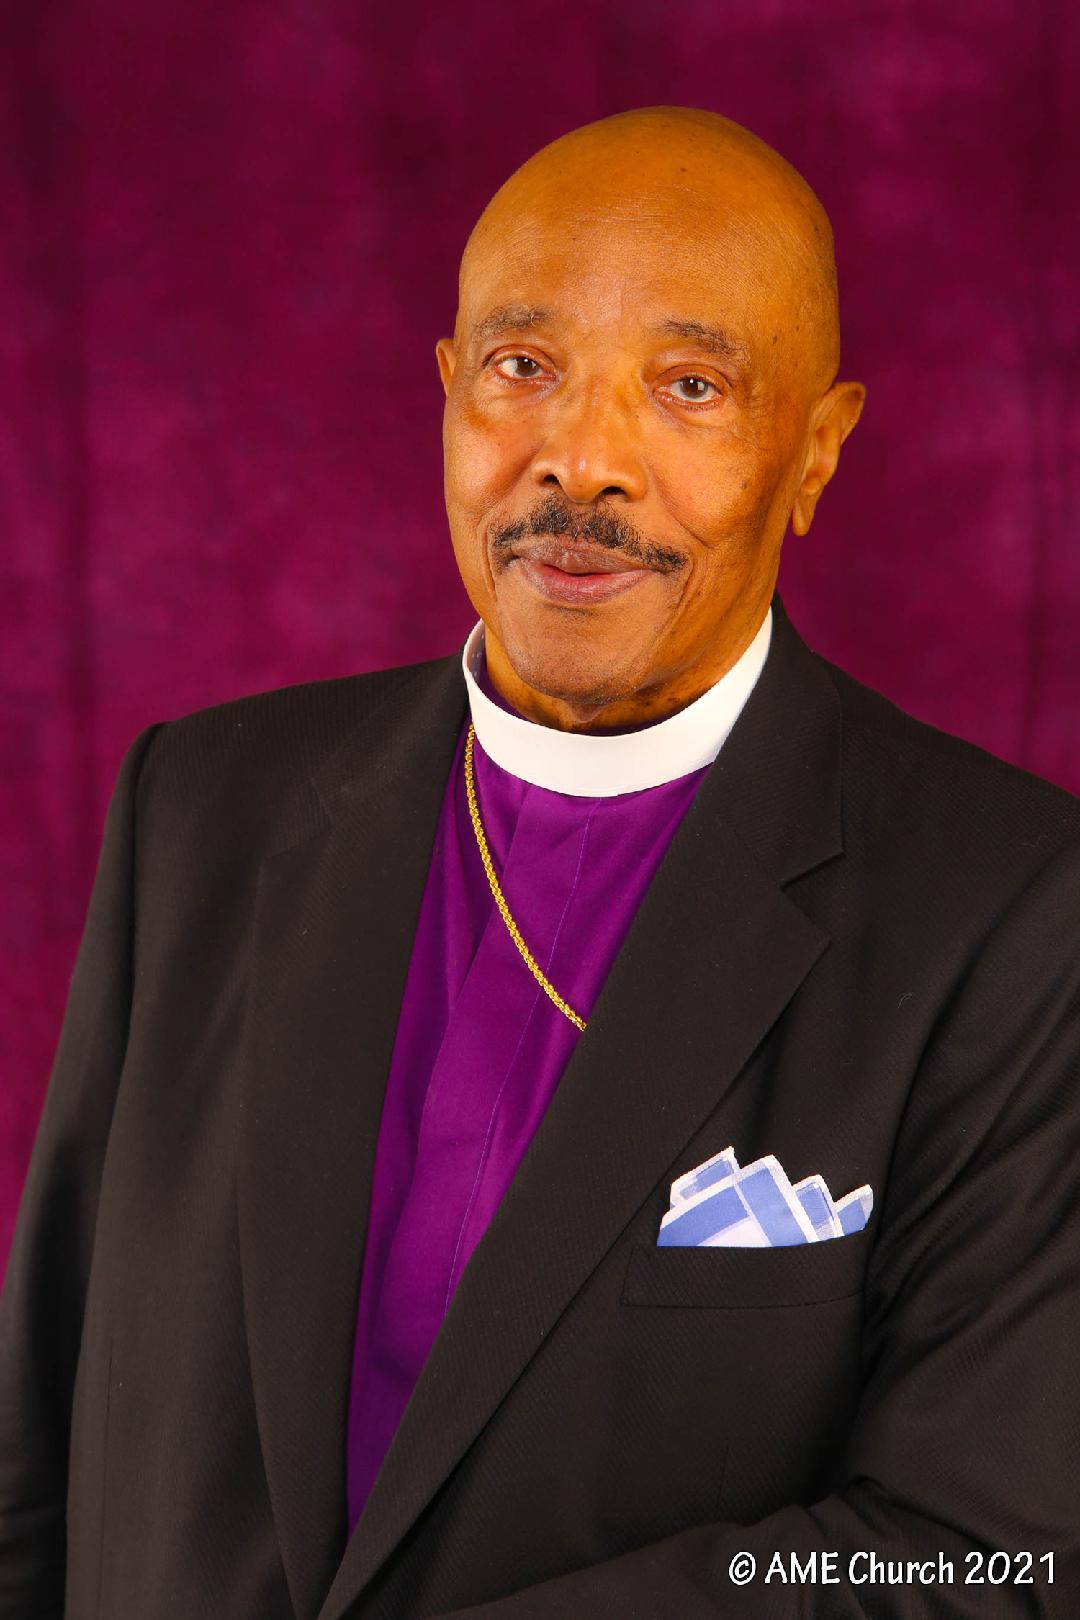 GENERAL CONFERENCE 2024 3RD EPISCOPAL DISTRICT OF THE AME CHURCH